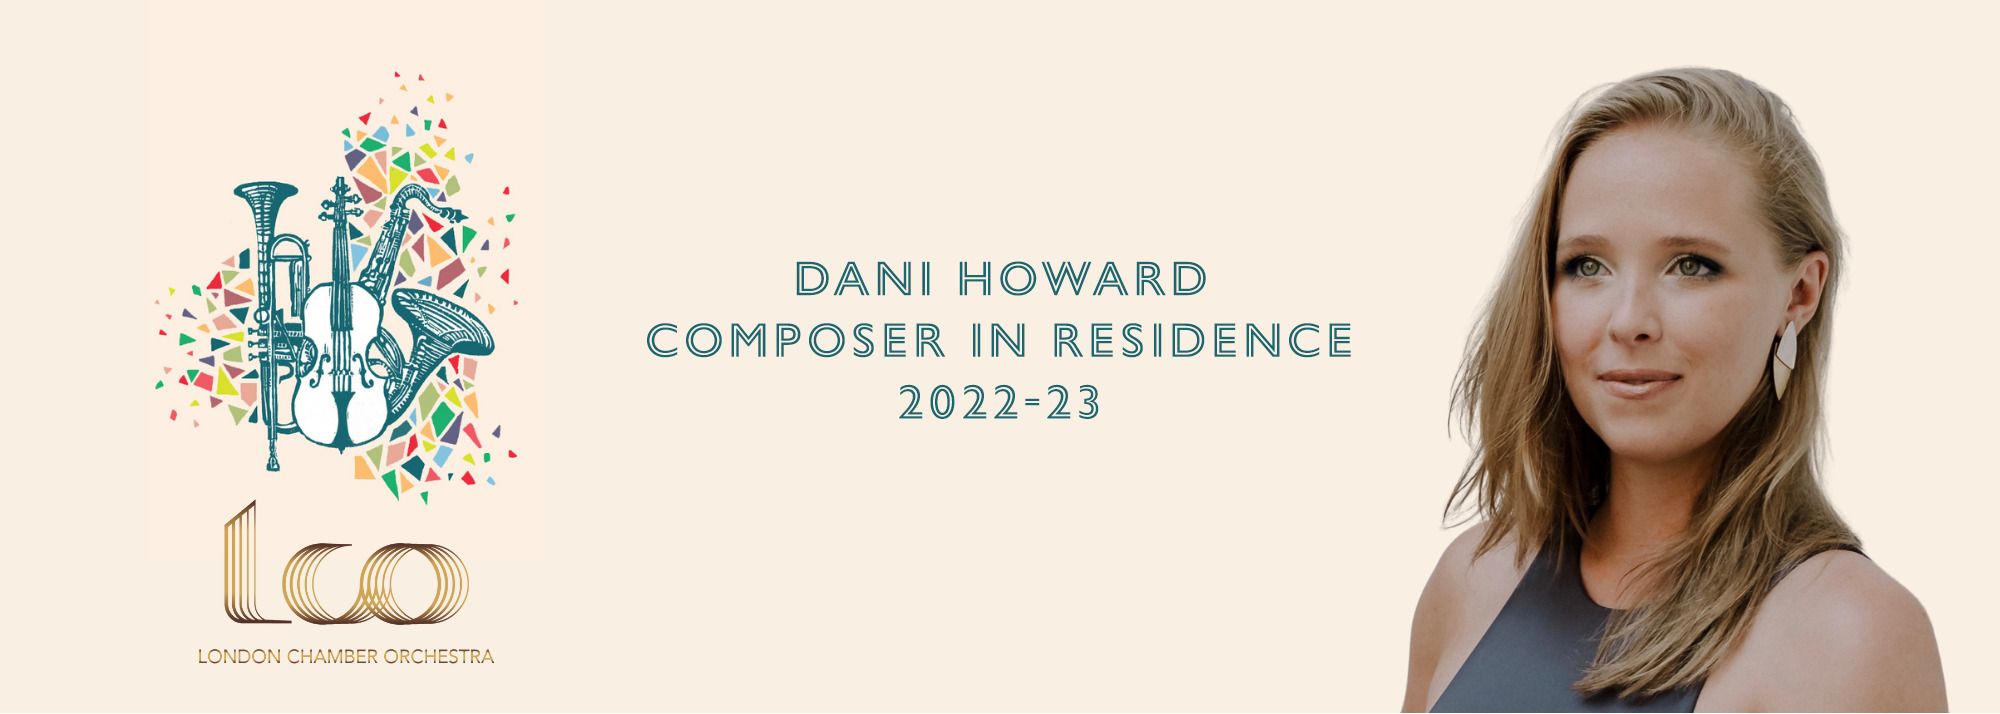 News: Composer Dani Howard Composer-in-Residence of the LCO